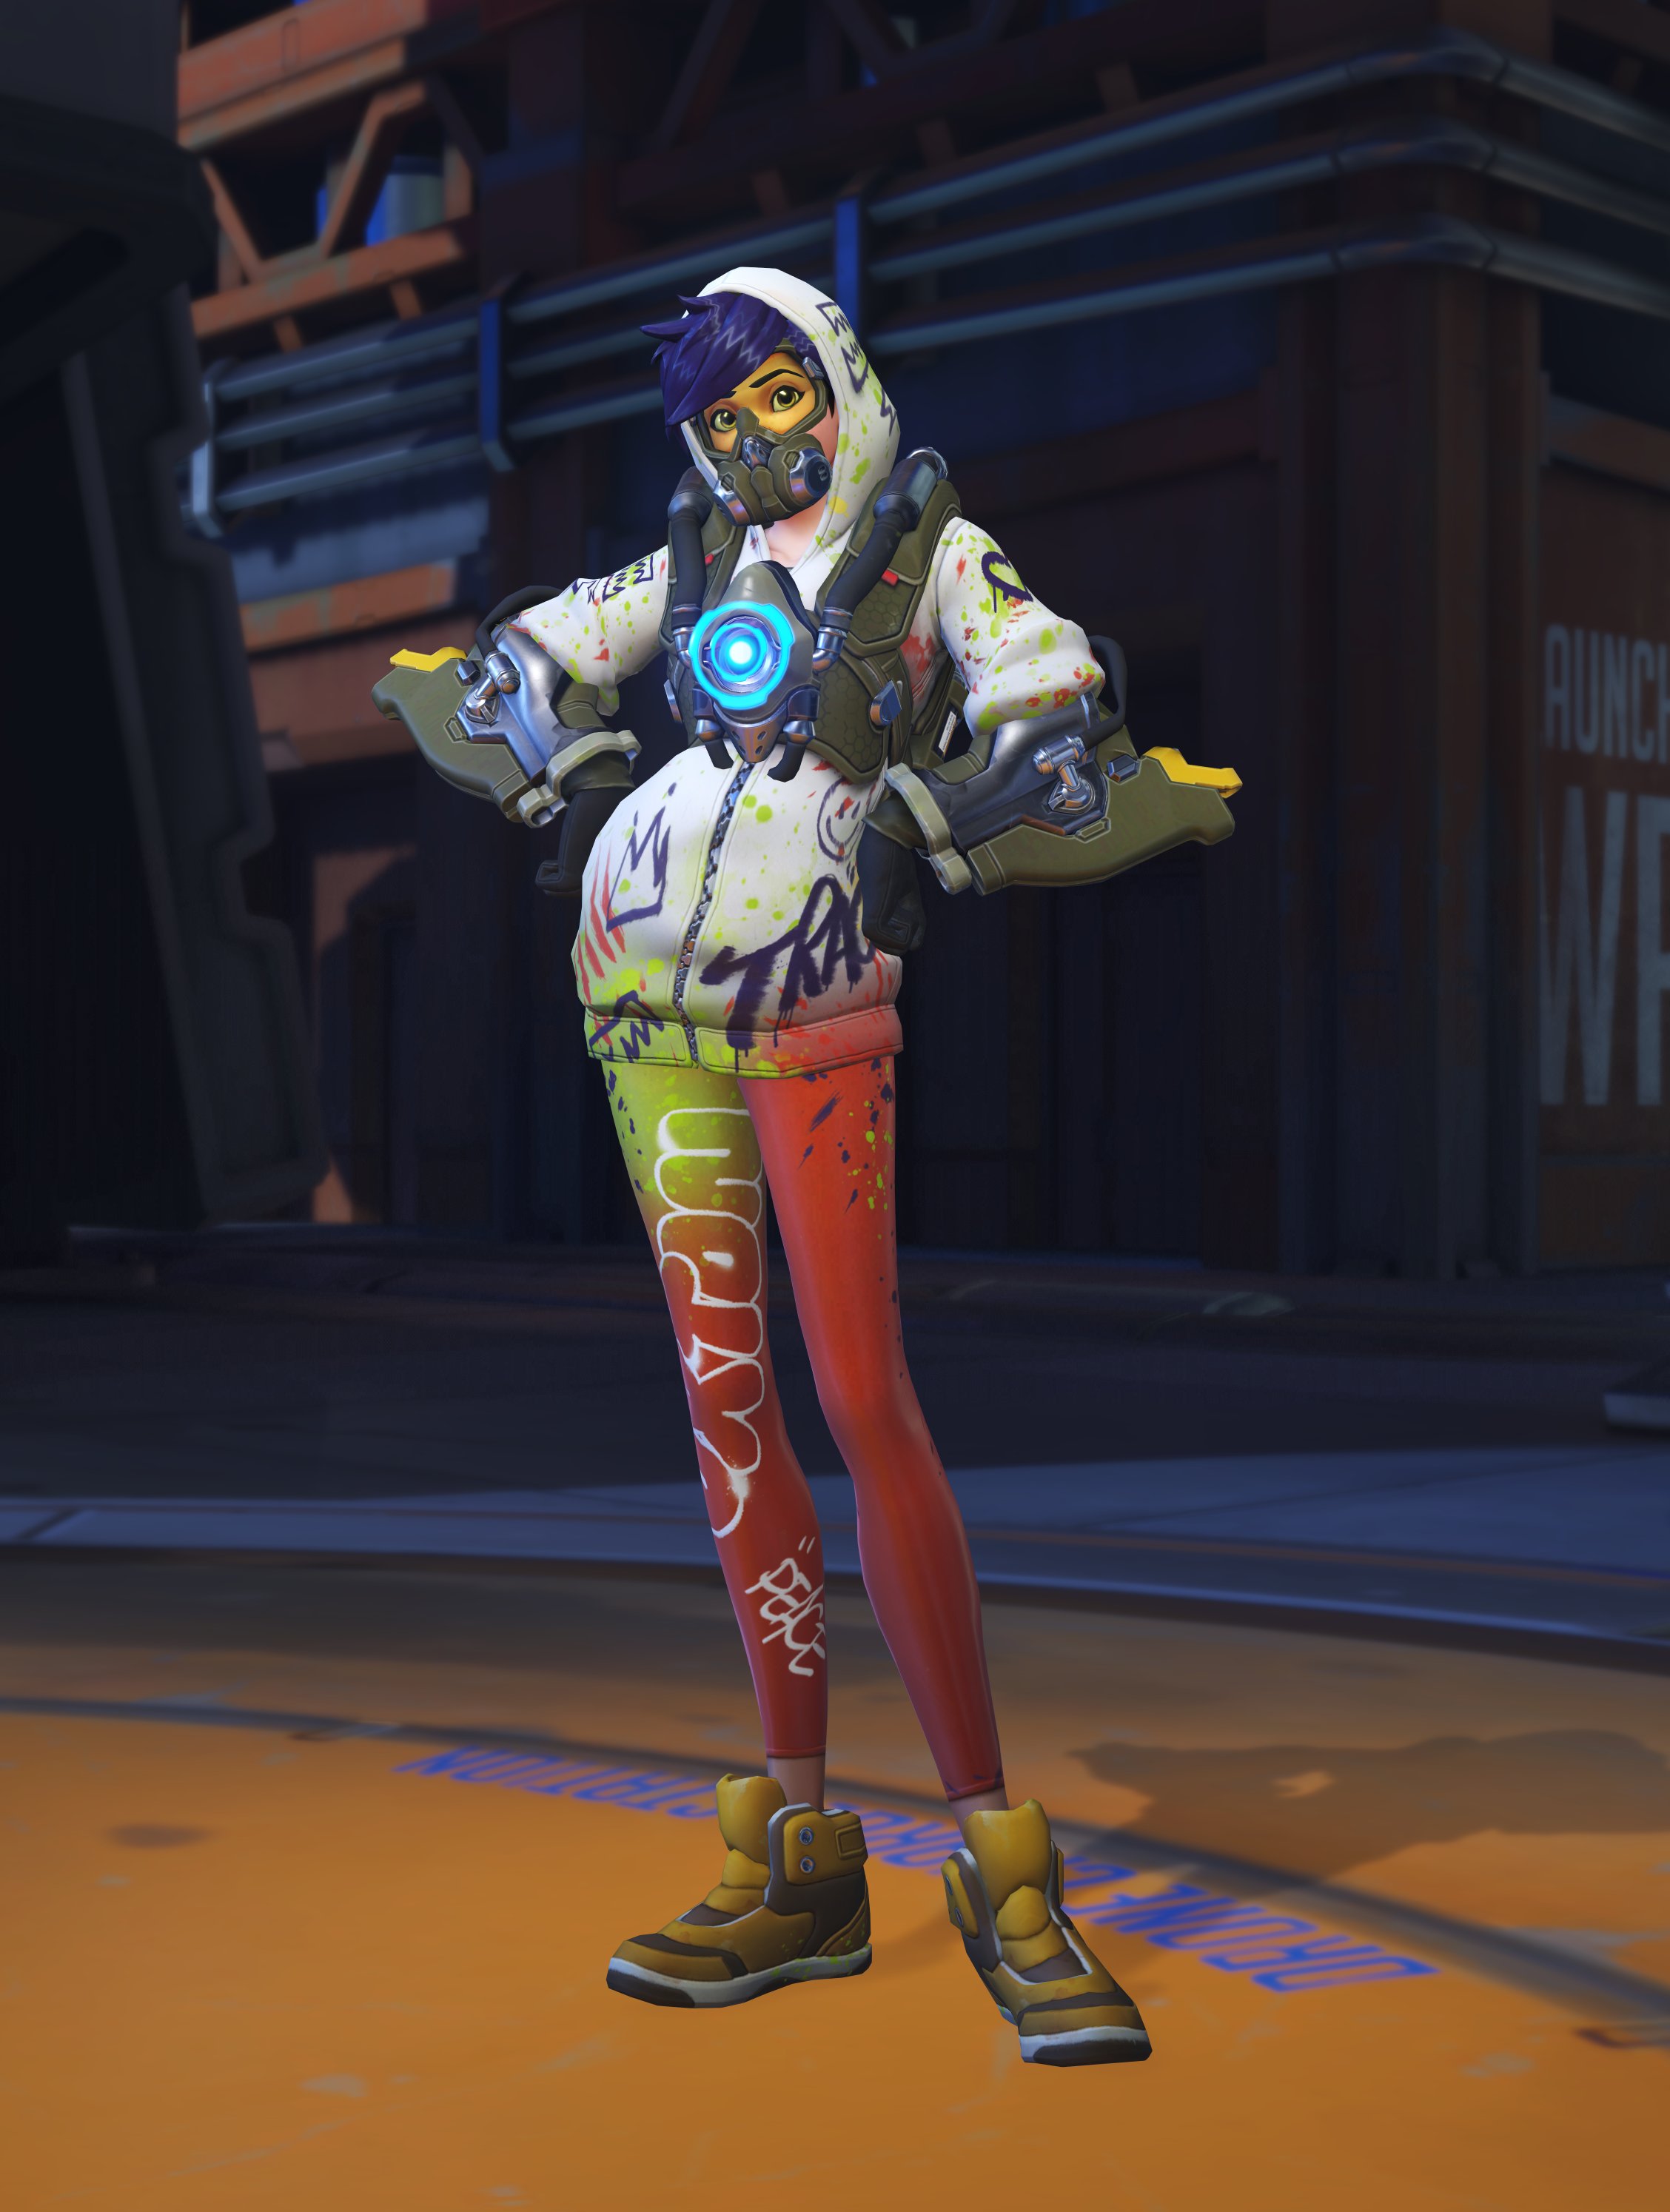 New tracer skin for the anniversary event. Hope I can get it